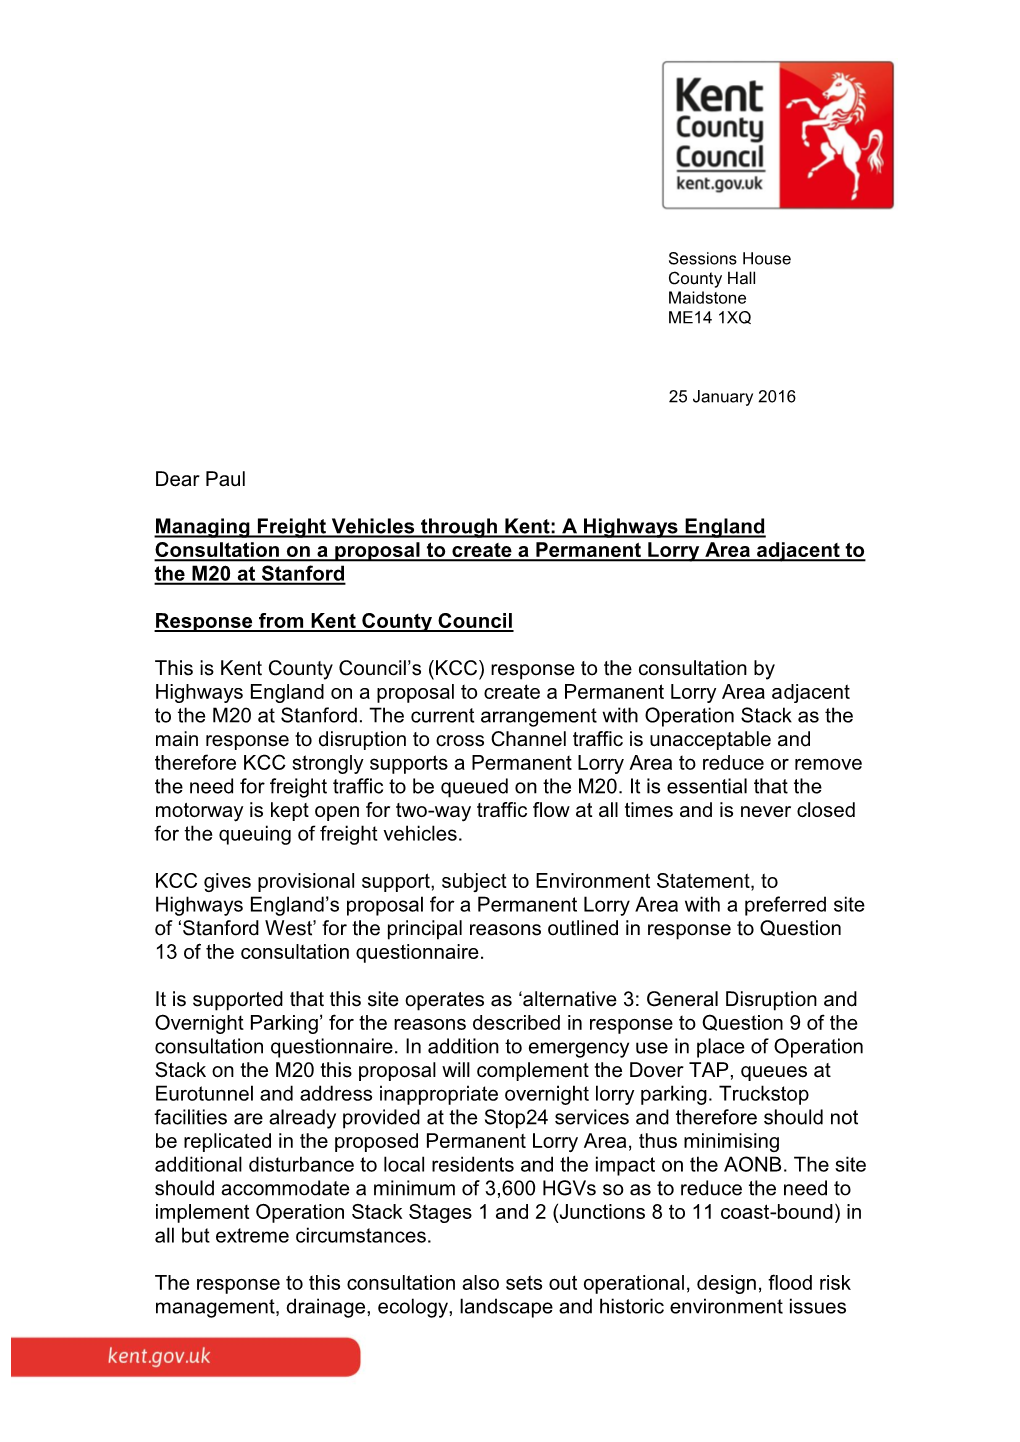 Read Our Response to the Highways England Operation Stack Consultation